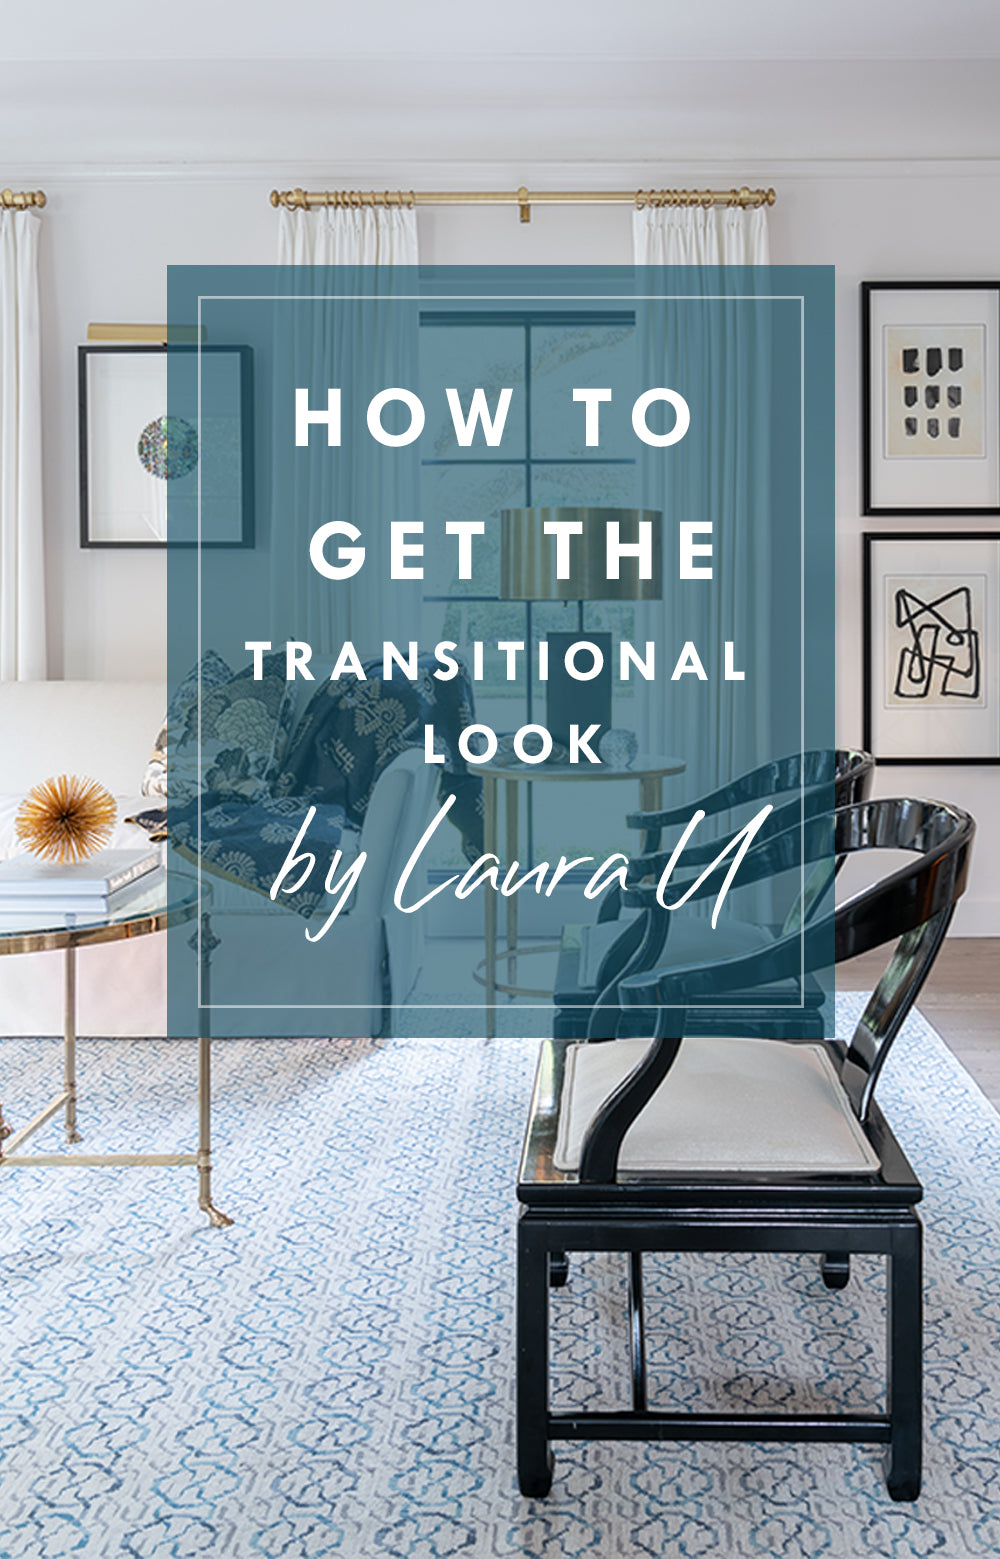 Transitional Design: How to get the look by Laura U